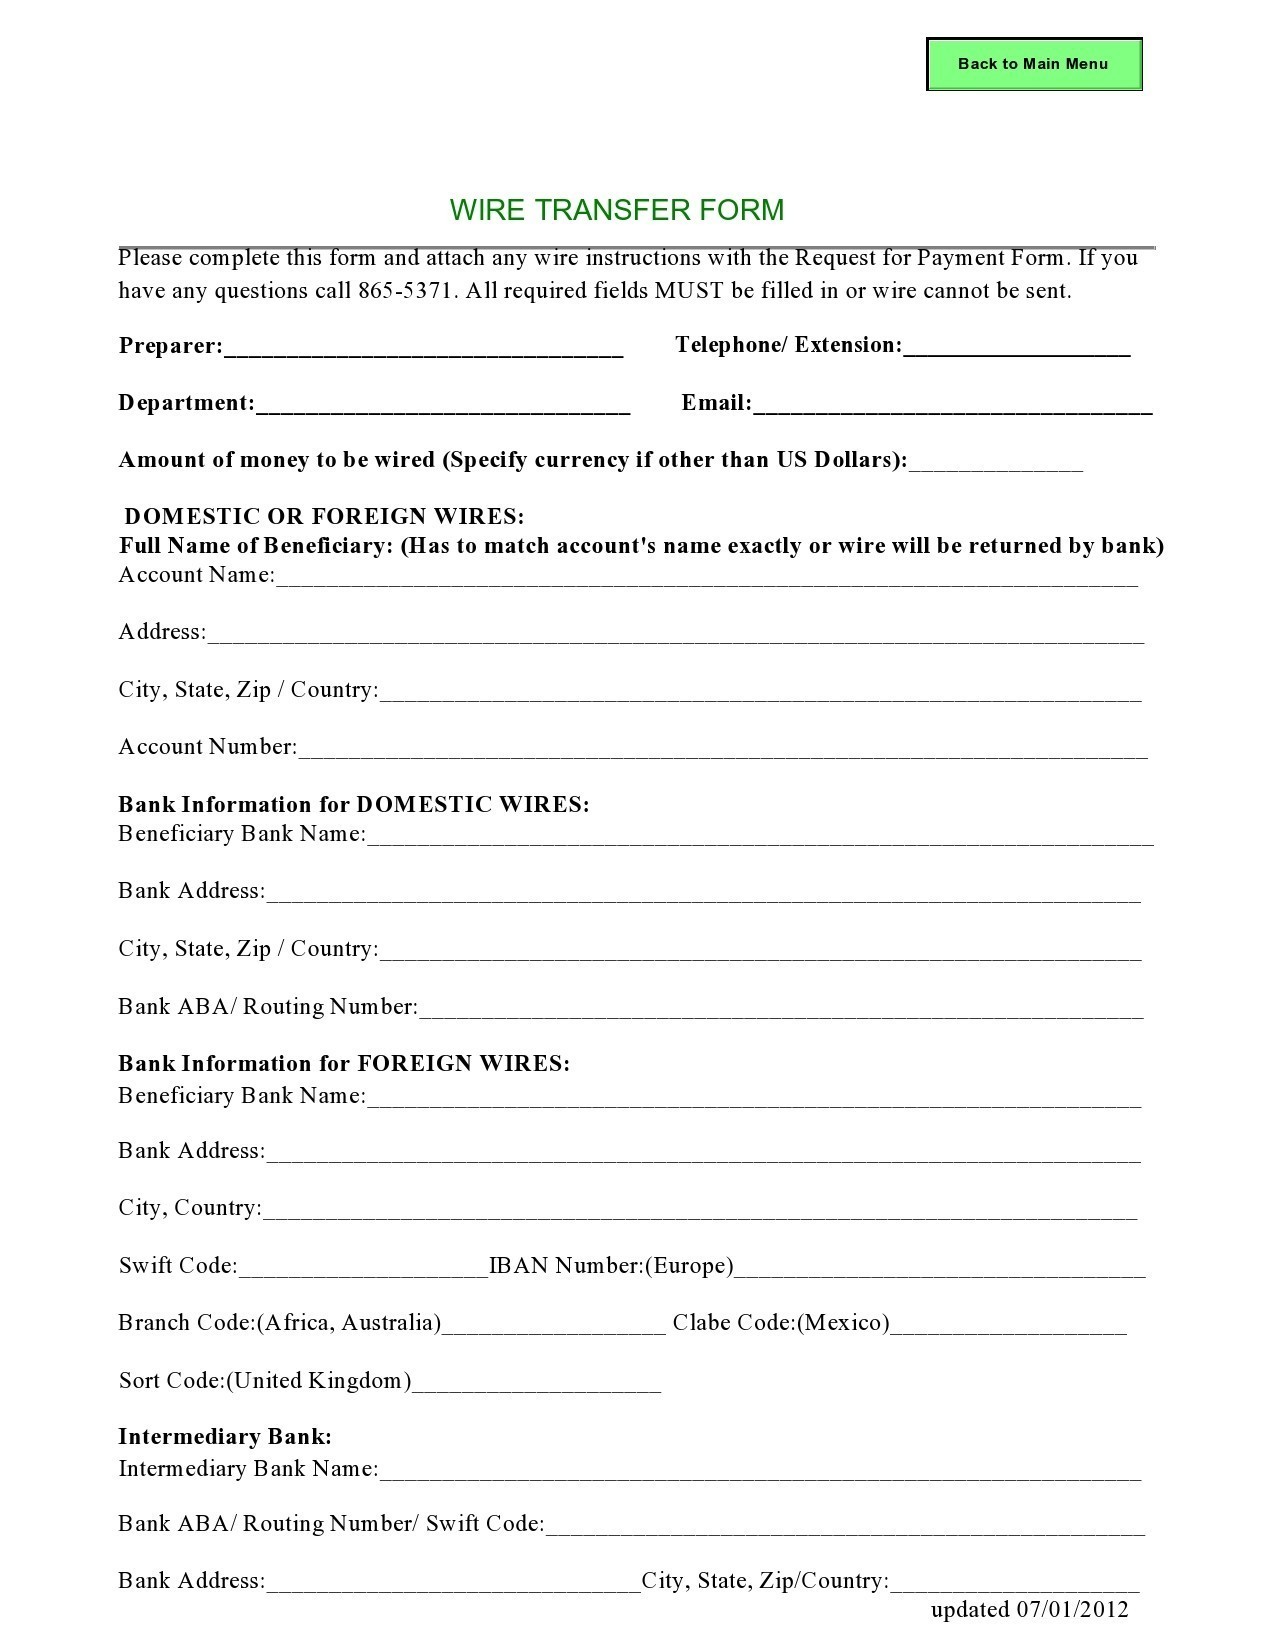 Free wire transfer form 35